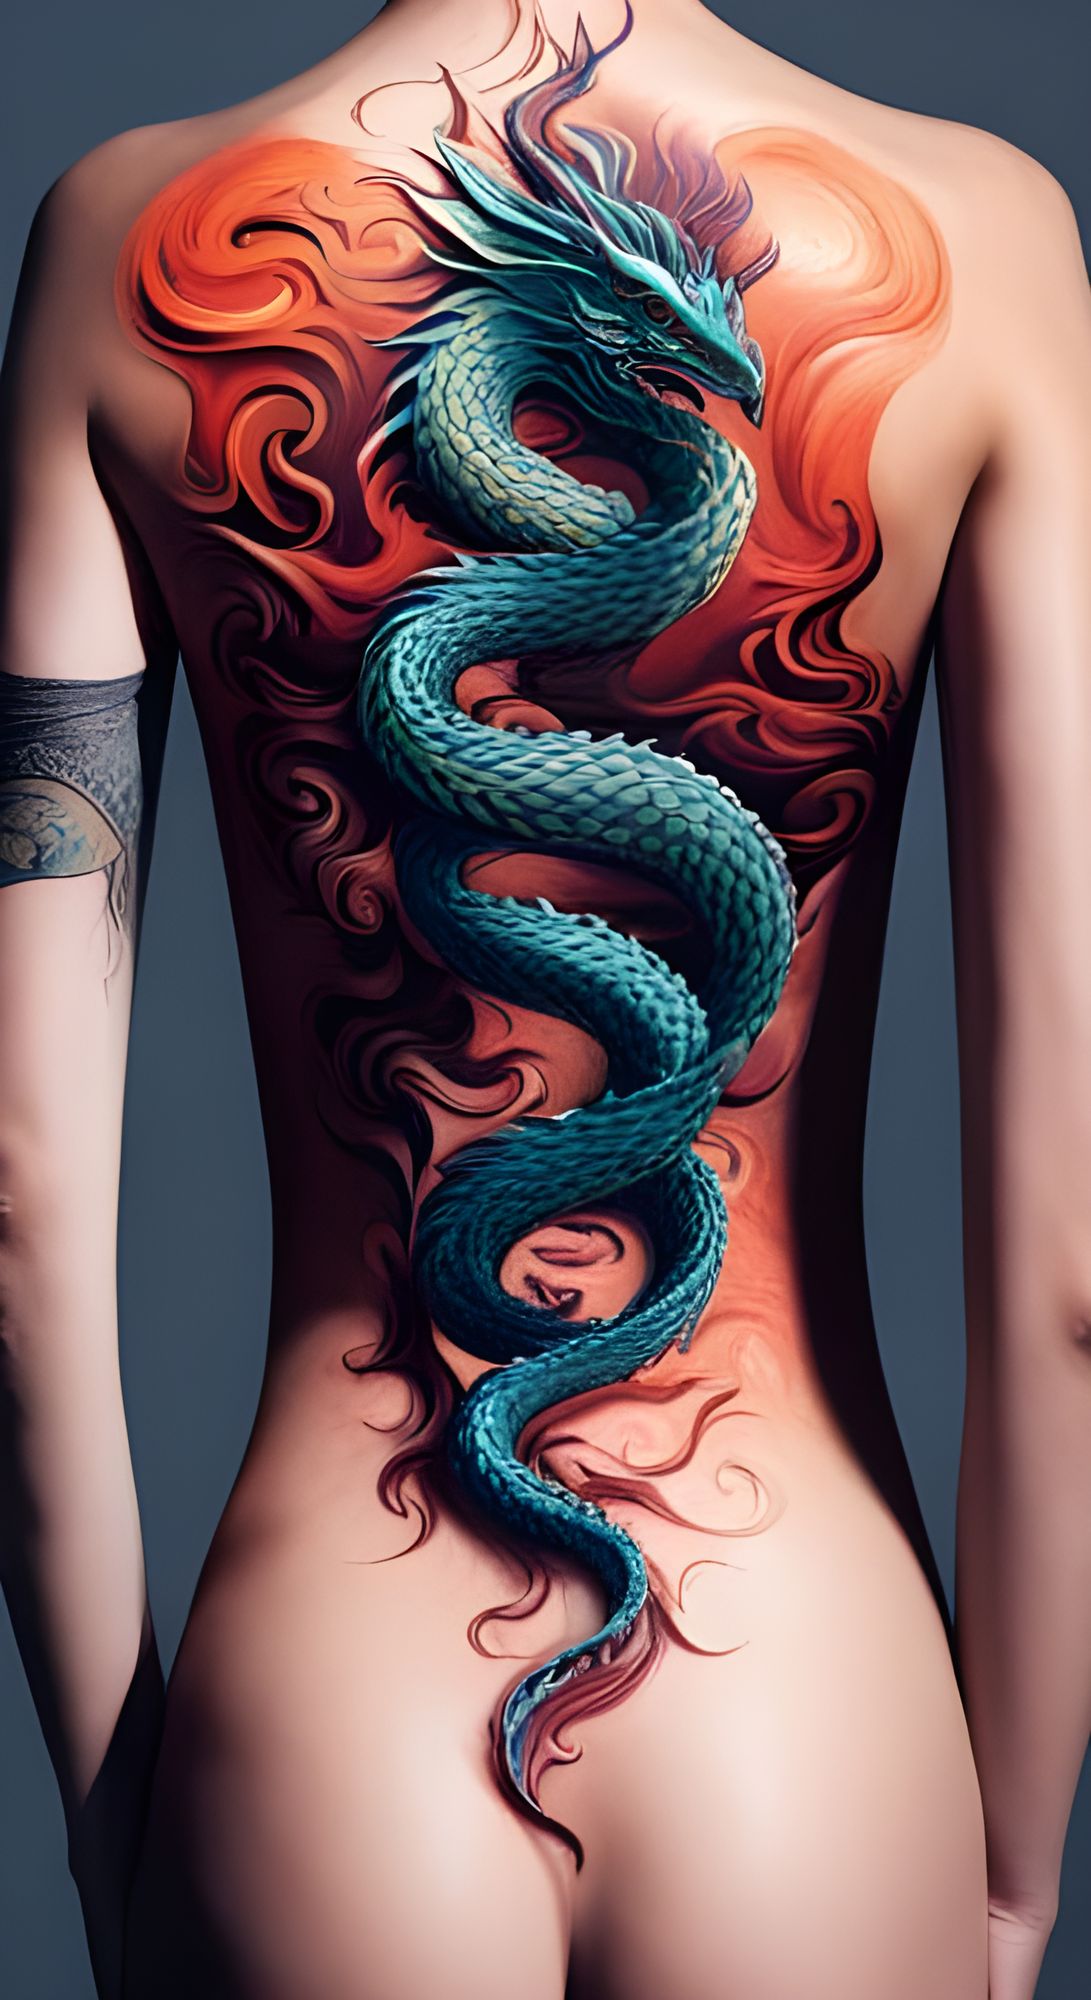 80 dragon tattoo ideas inspired by everything from folklore tales to Game  of Thrones %%page%% - Architecture E-zine | Dragon tattoo, Tattoos, Dragon  sleeve tattoos